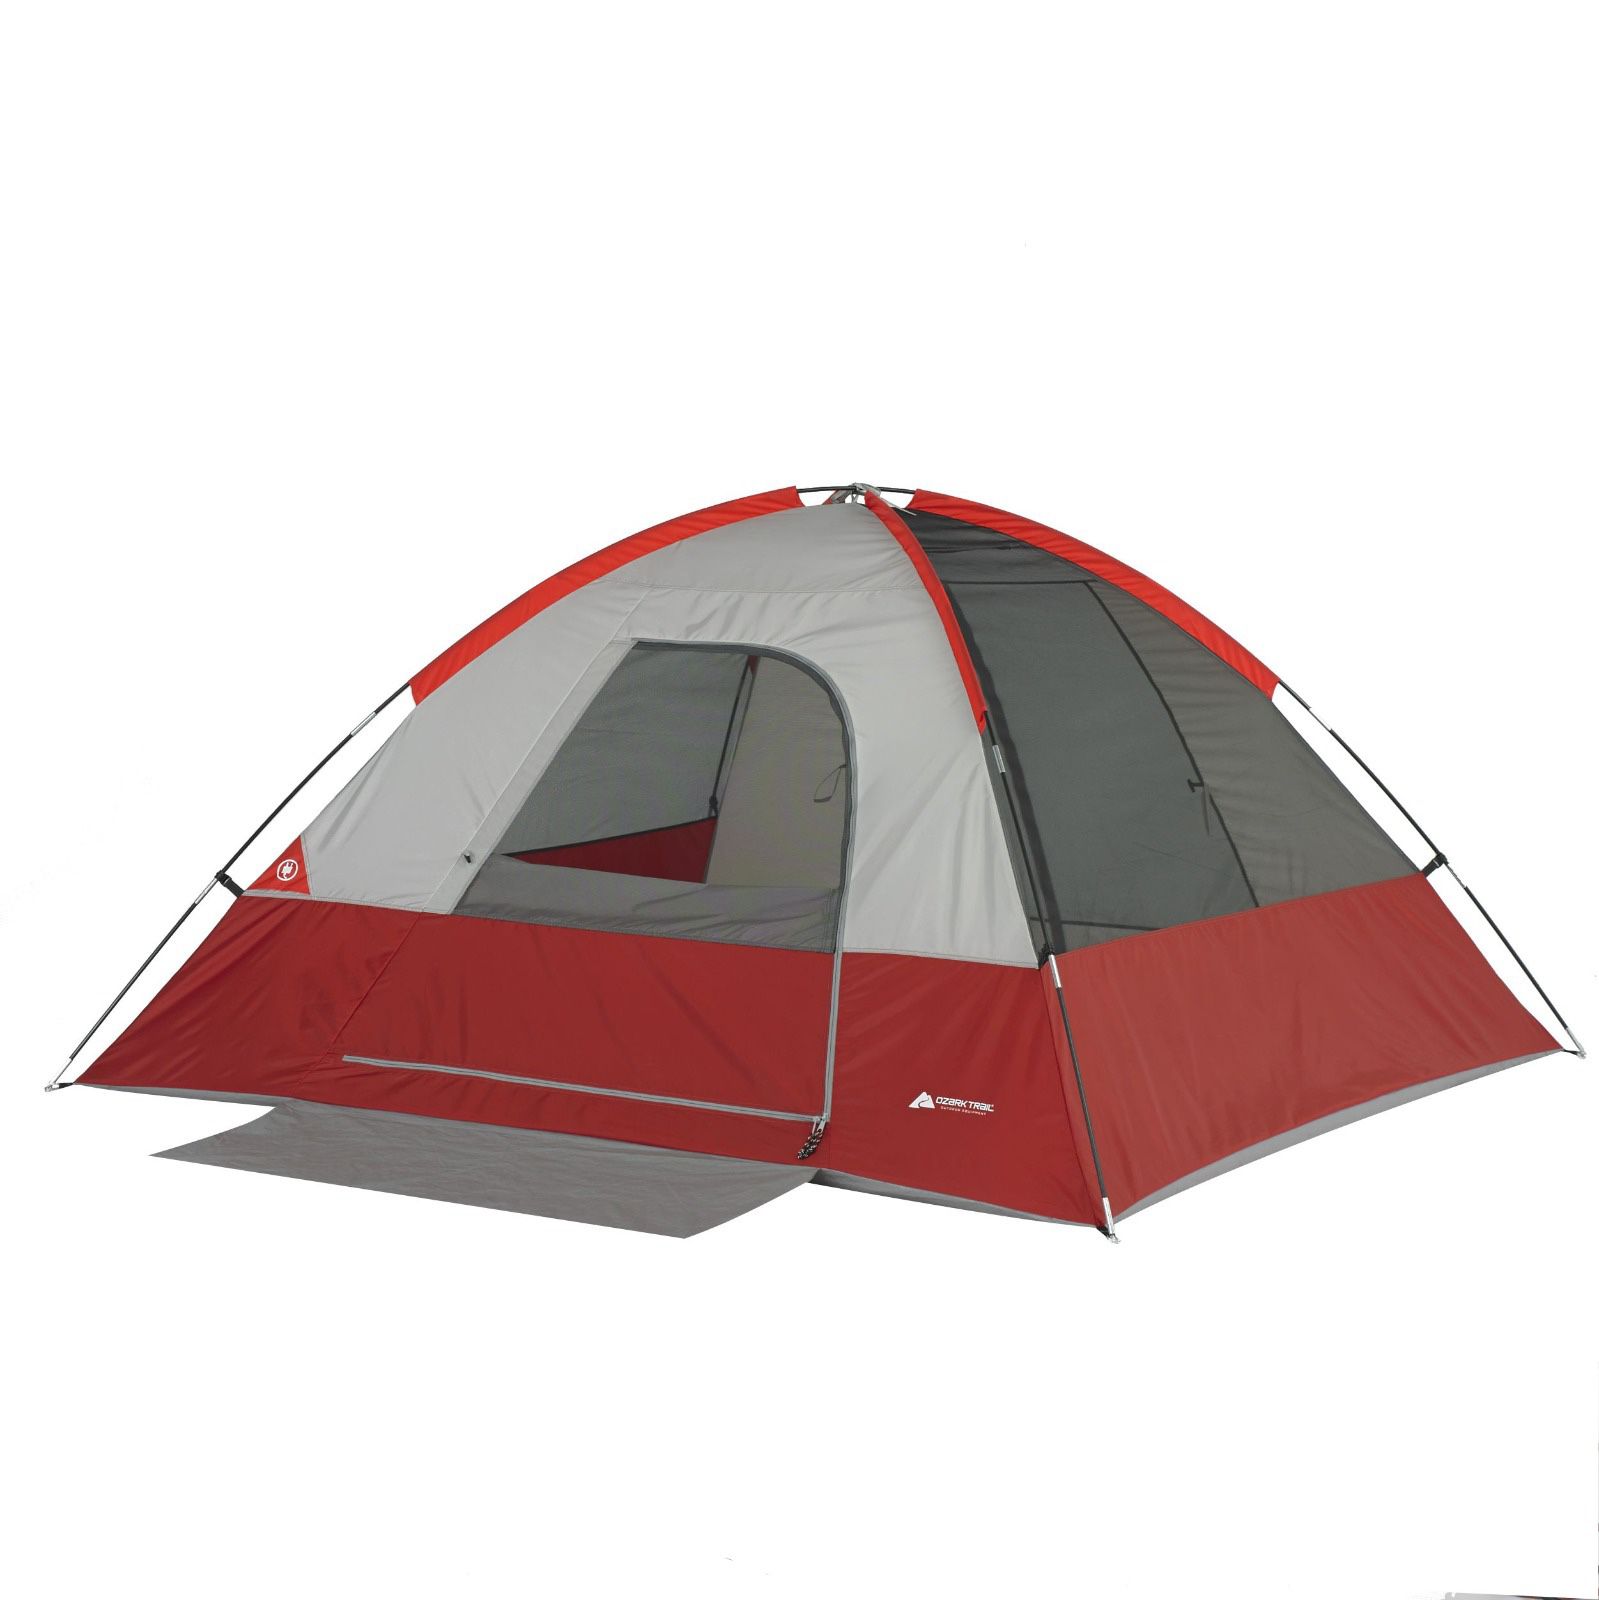 Ozark Trail 4-Person Dome Tent with Vestibule and Full Coverage Fly